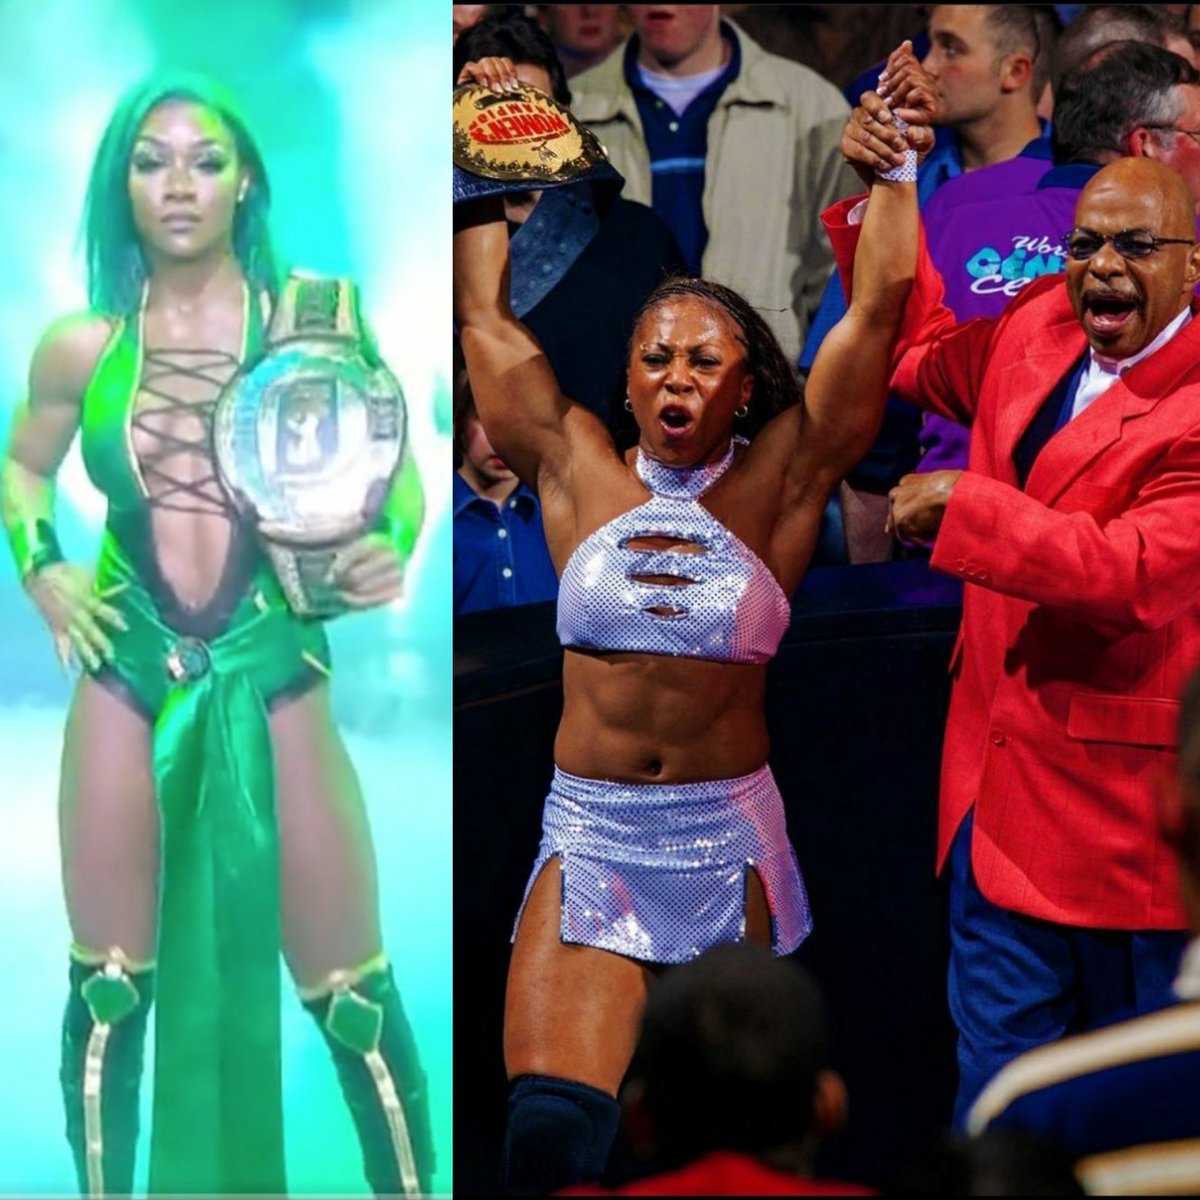 I STILL say Jazz should have been brought in to manage Jade Cargill. Jade has a similar presence to Jazz although Jazz is shorter. Jazz used to kick Trish Stratus' ass and never got her flowers with the WWE crowd. She should also be in the #WWEHOF 
#AEWRampage https://t.co/1fuKH0B0Cq